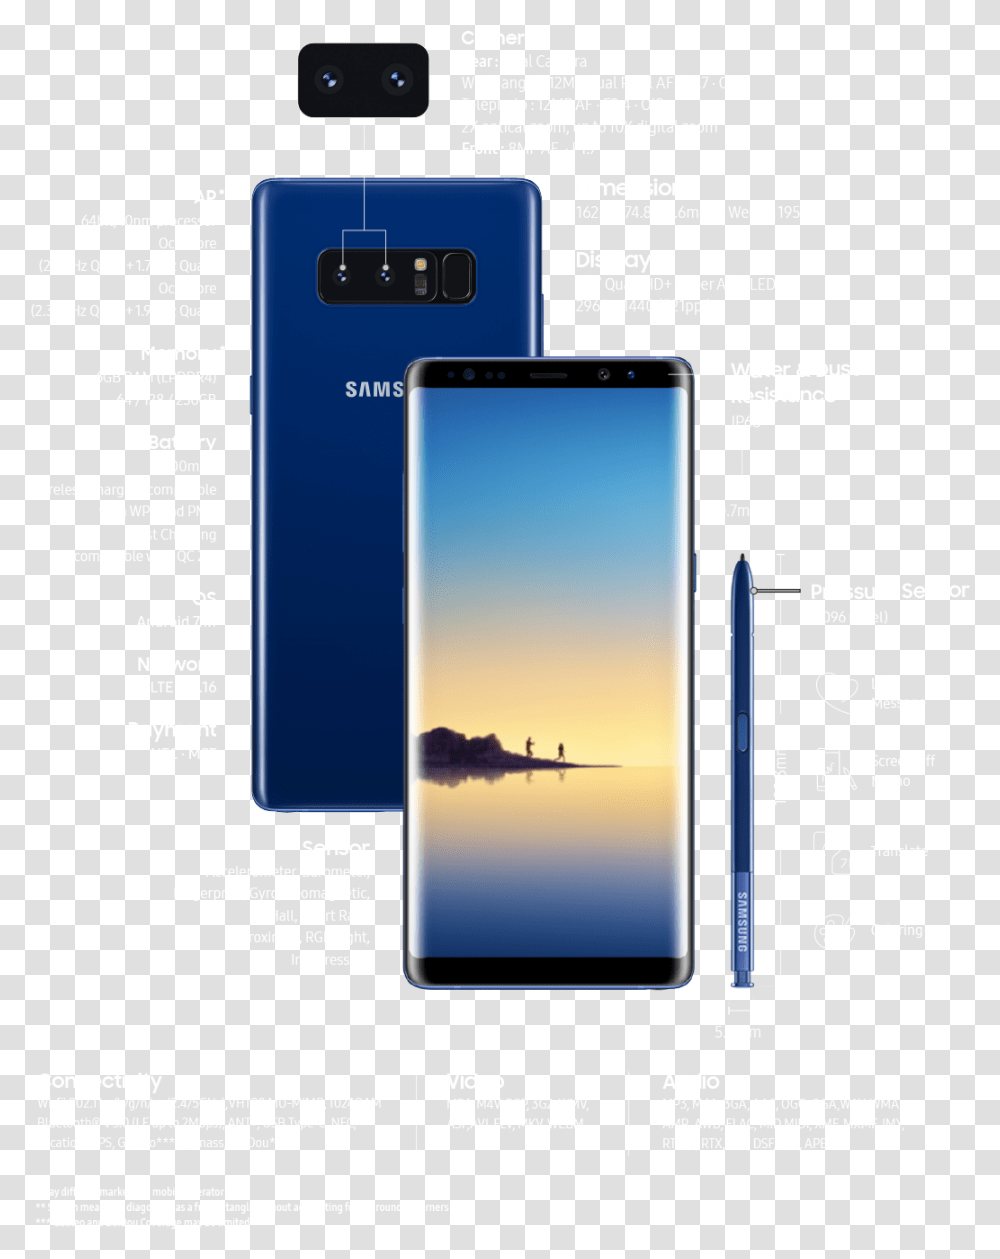 Samsung Note 8 Features And Specifications, Mobile Phone, Electronics, Airplane, Vehicle Transparent Png